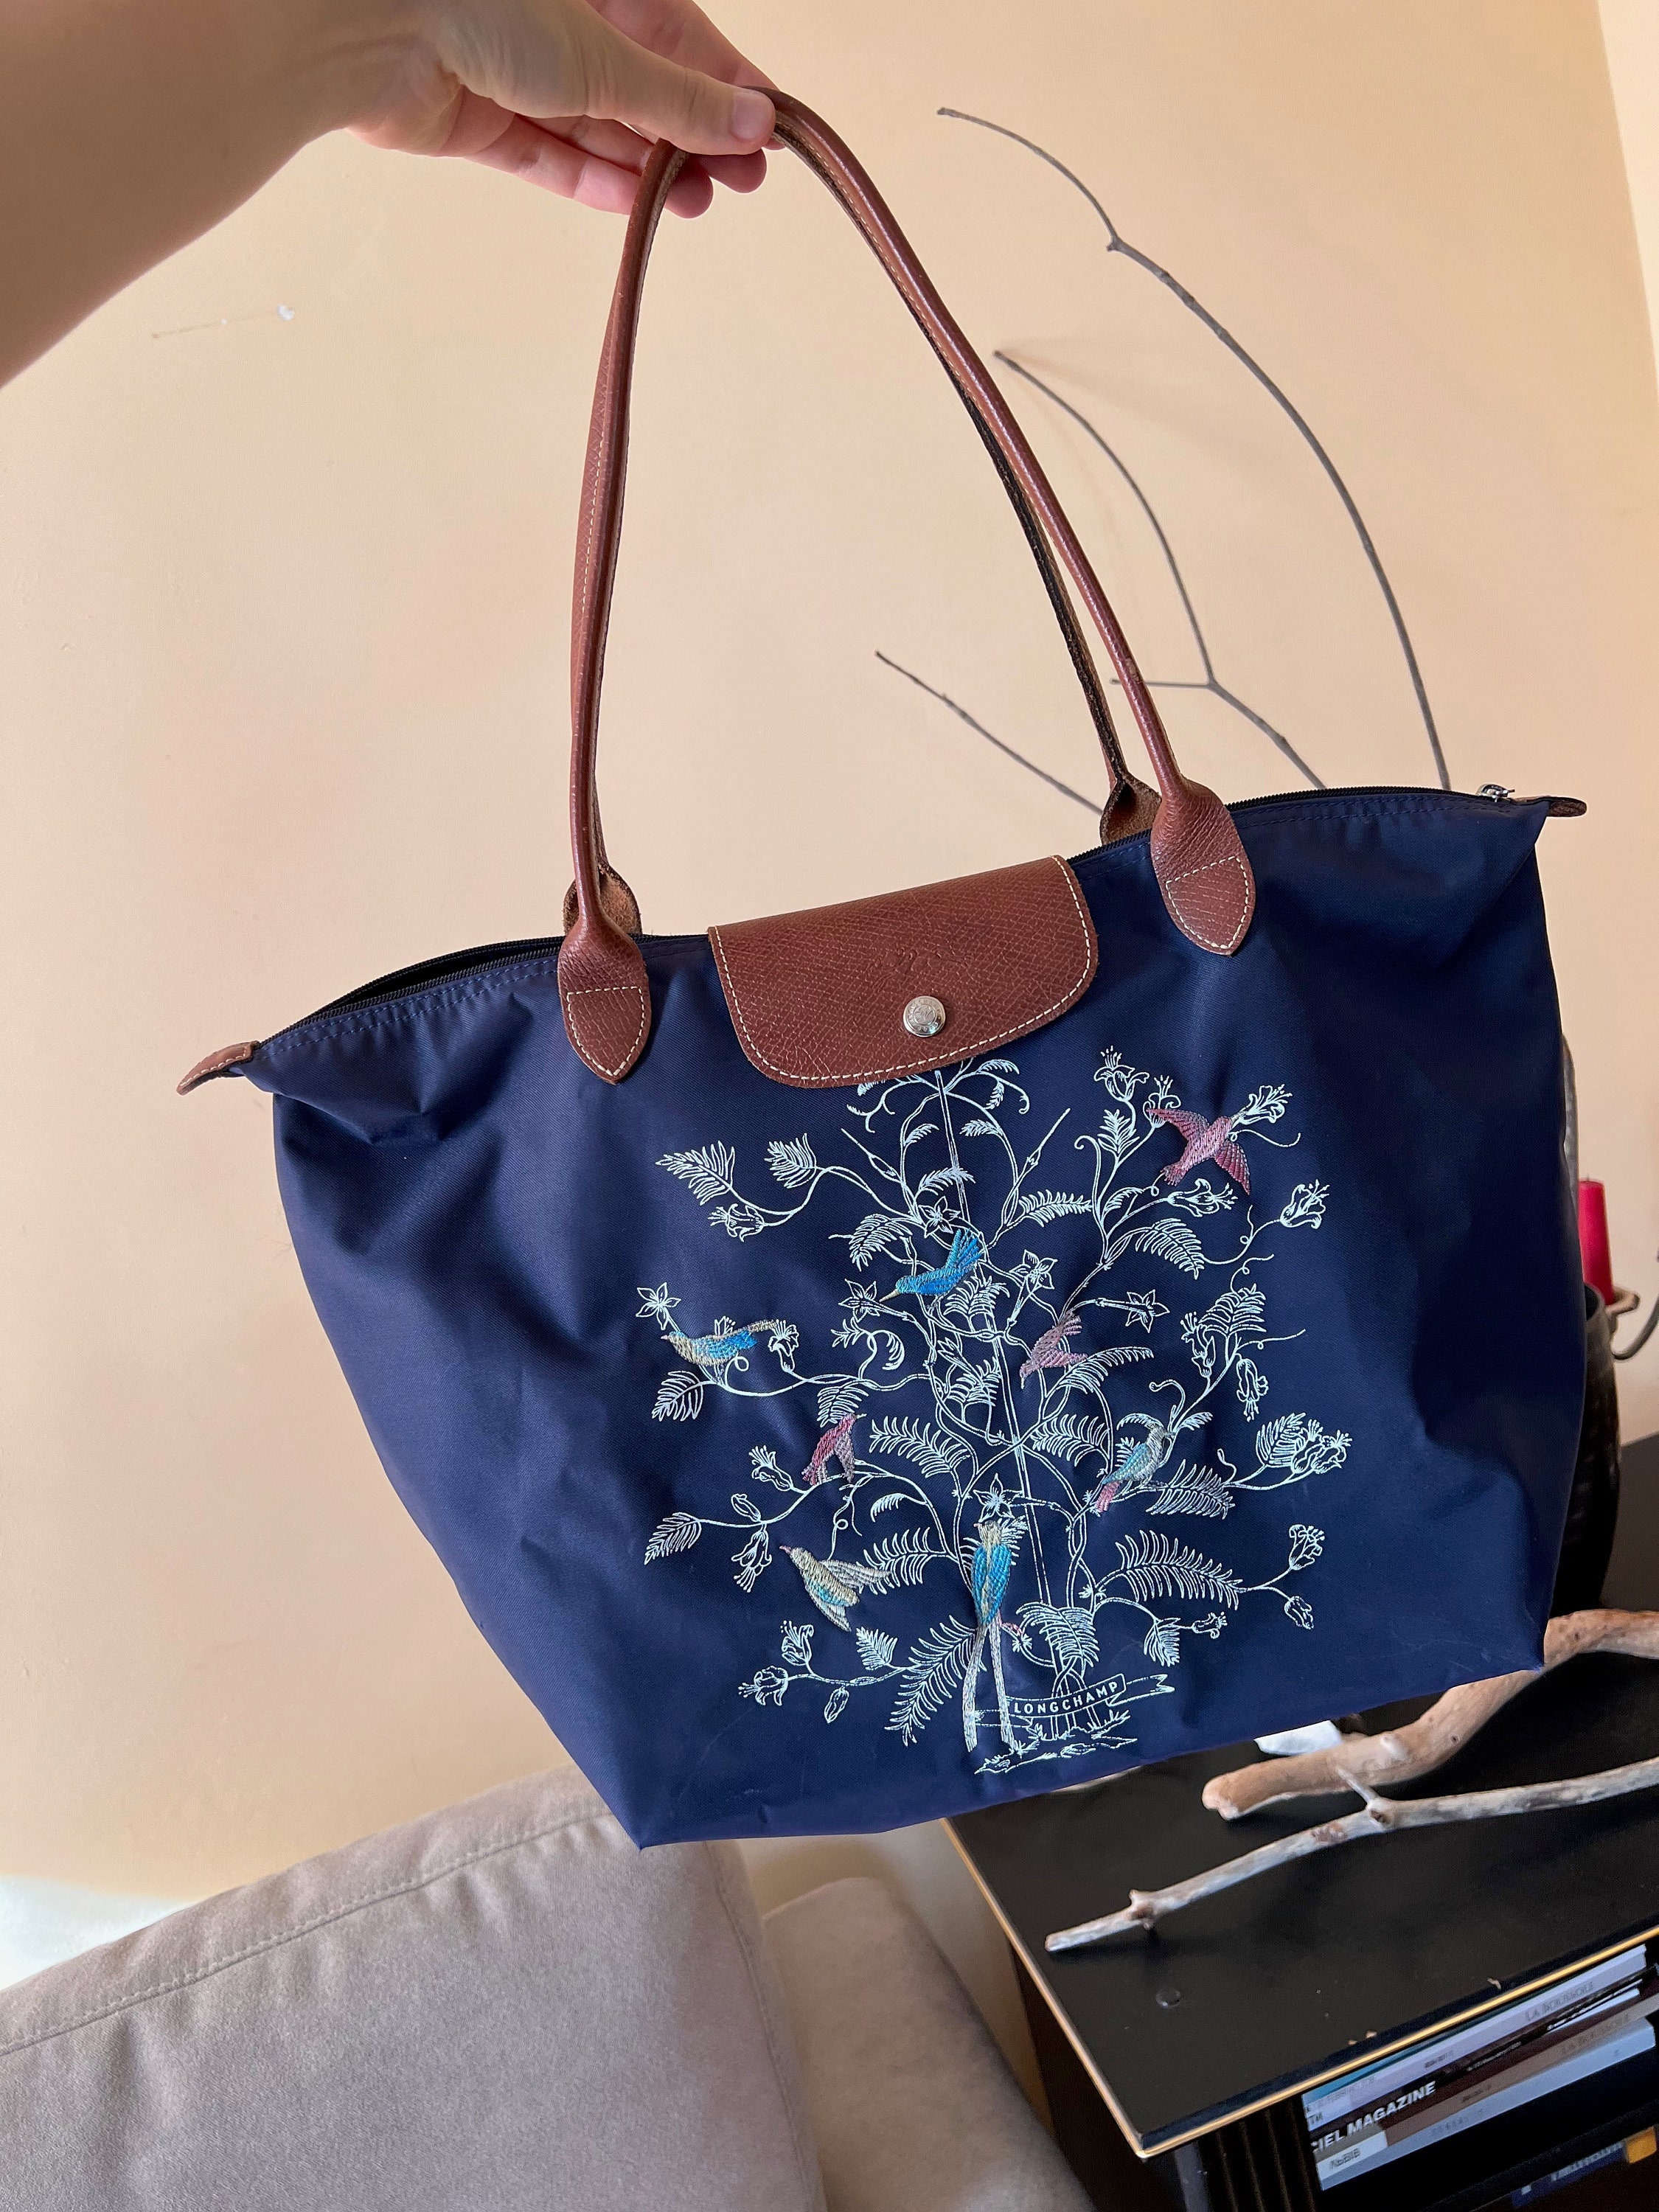 LONGCHAMP Tote bag Leather Handbag Year Of The Ox, Limited Edition. rrp  £350.